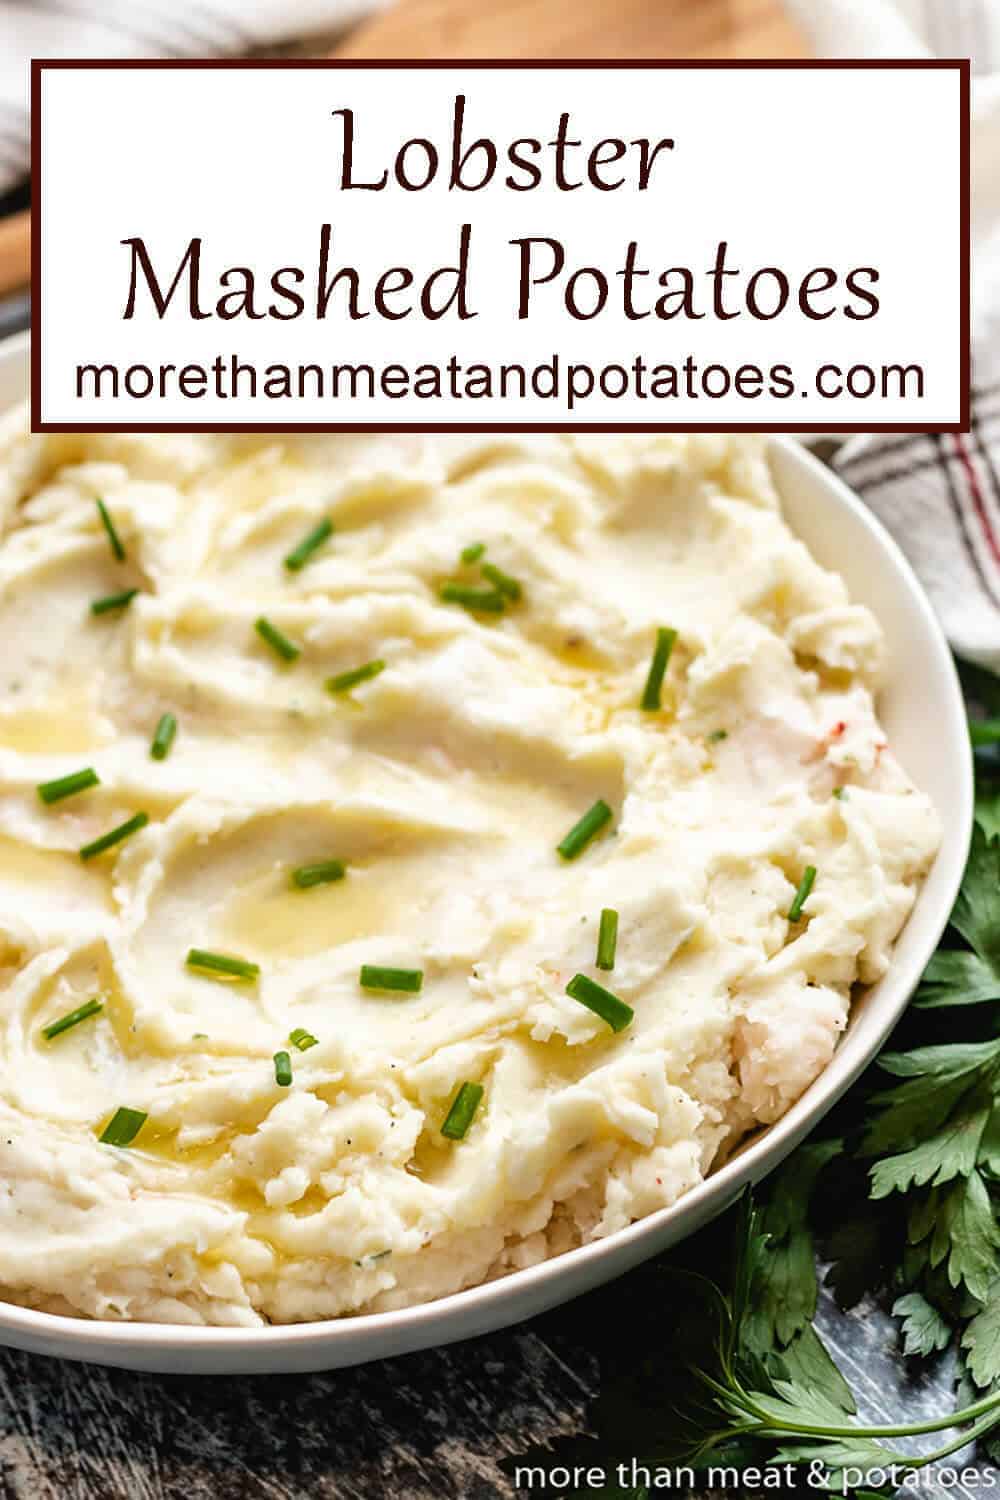 Lobster Mashed Potatoes